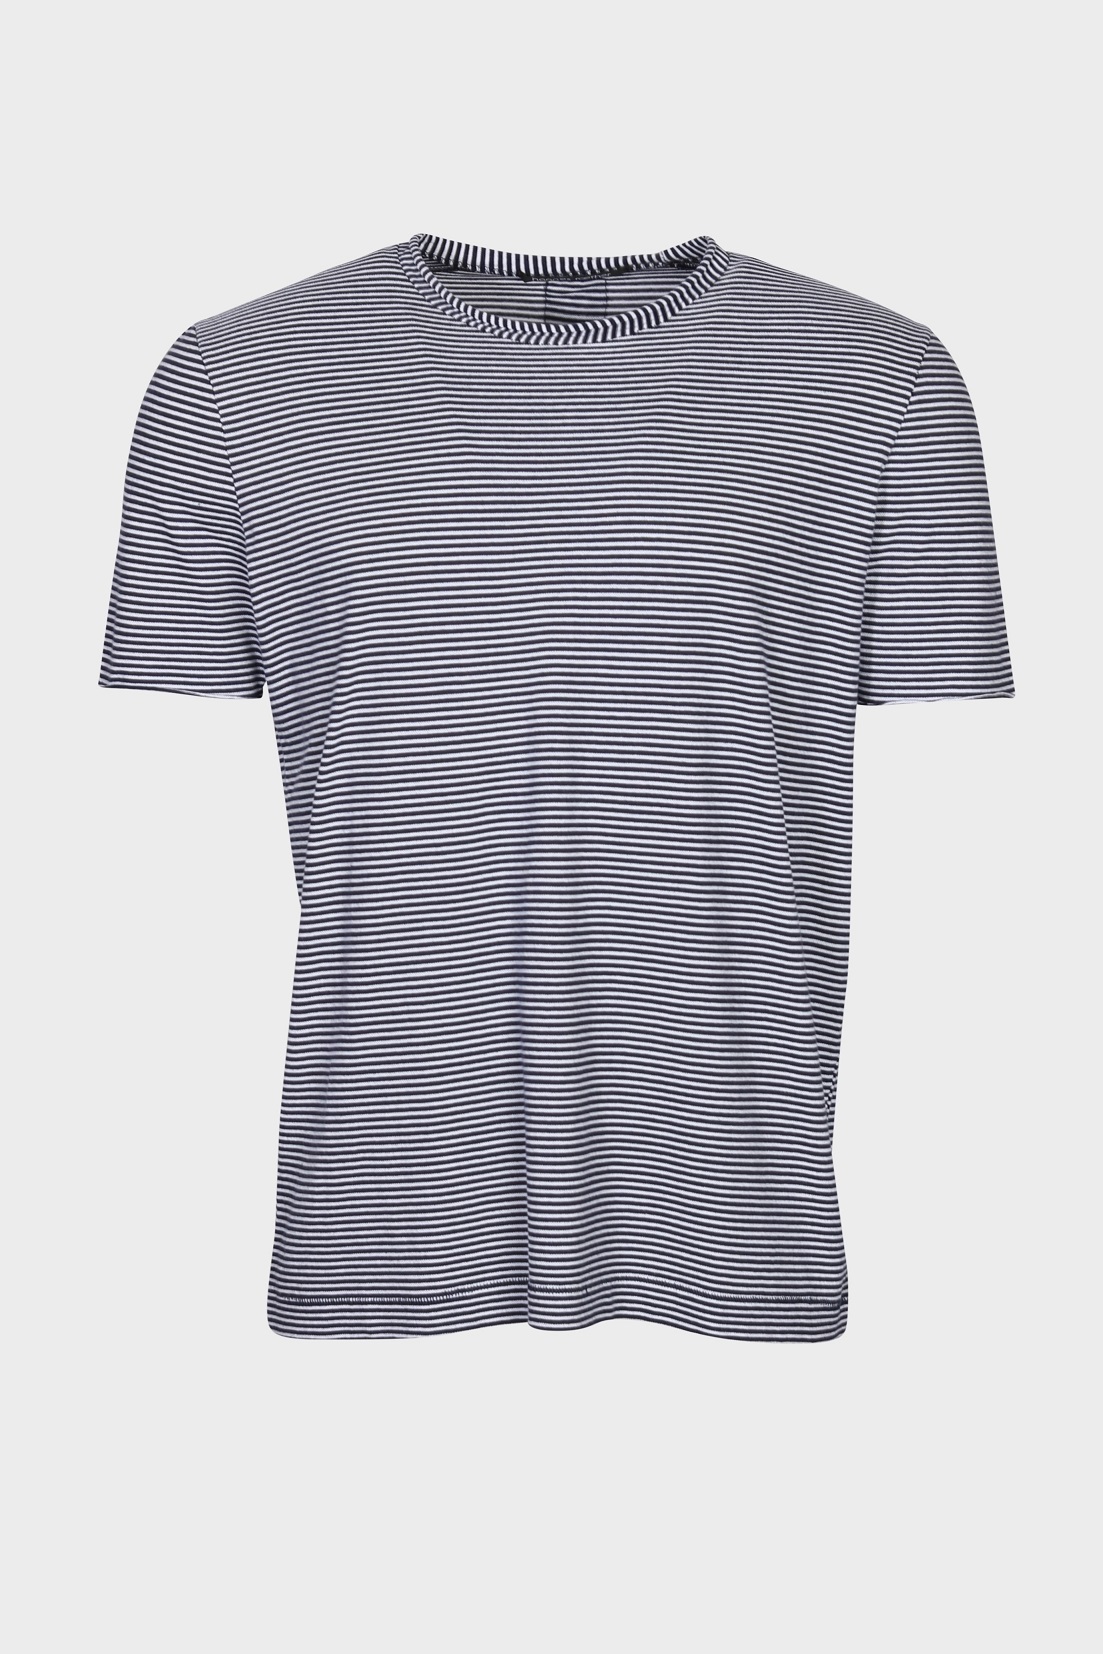 HANNES ROETHER T-Shirt in Navy/White Stripes XL